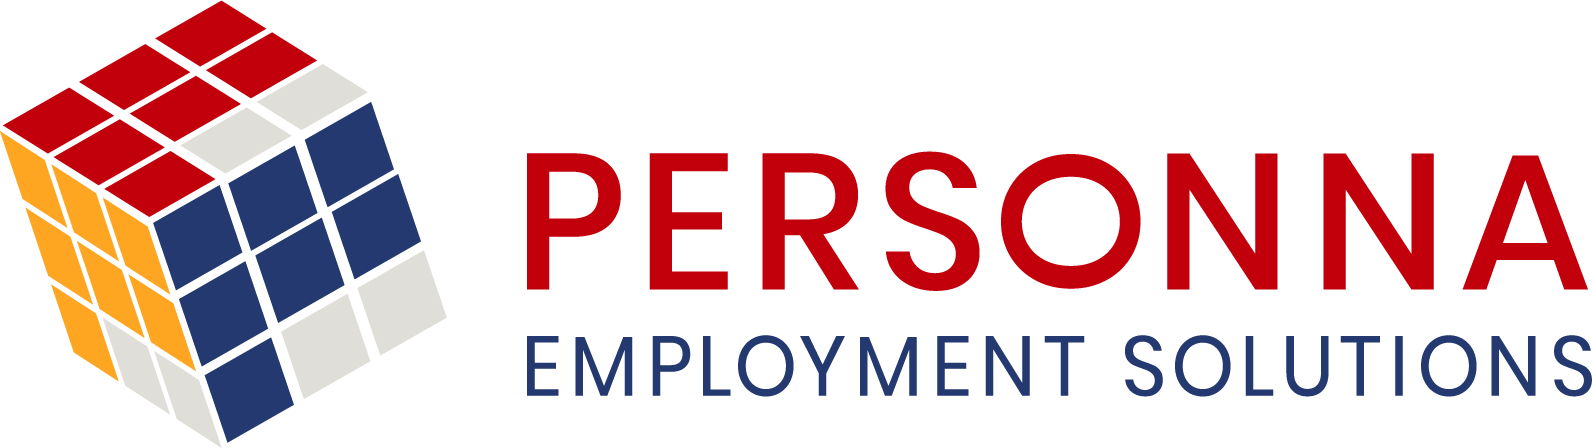 Personna.org